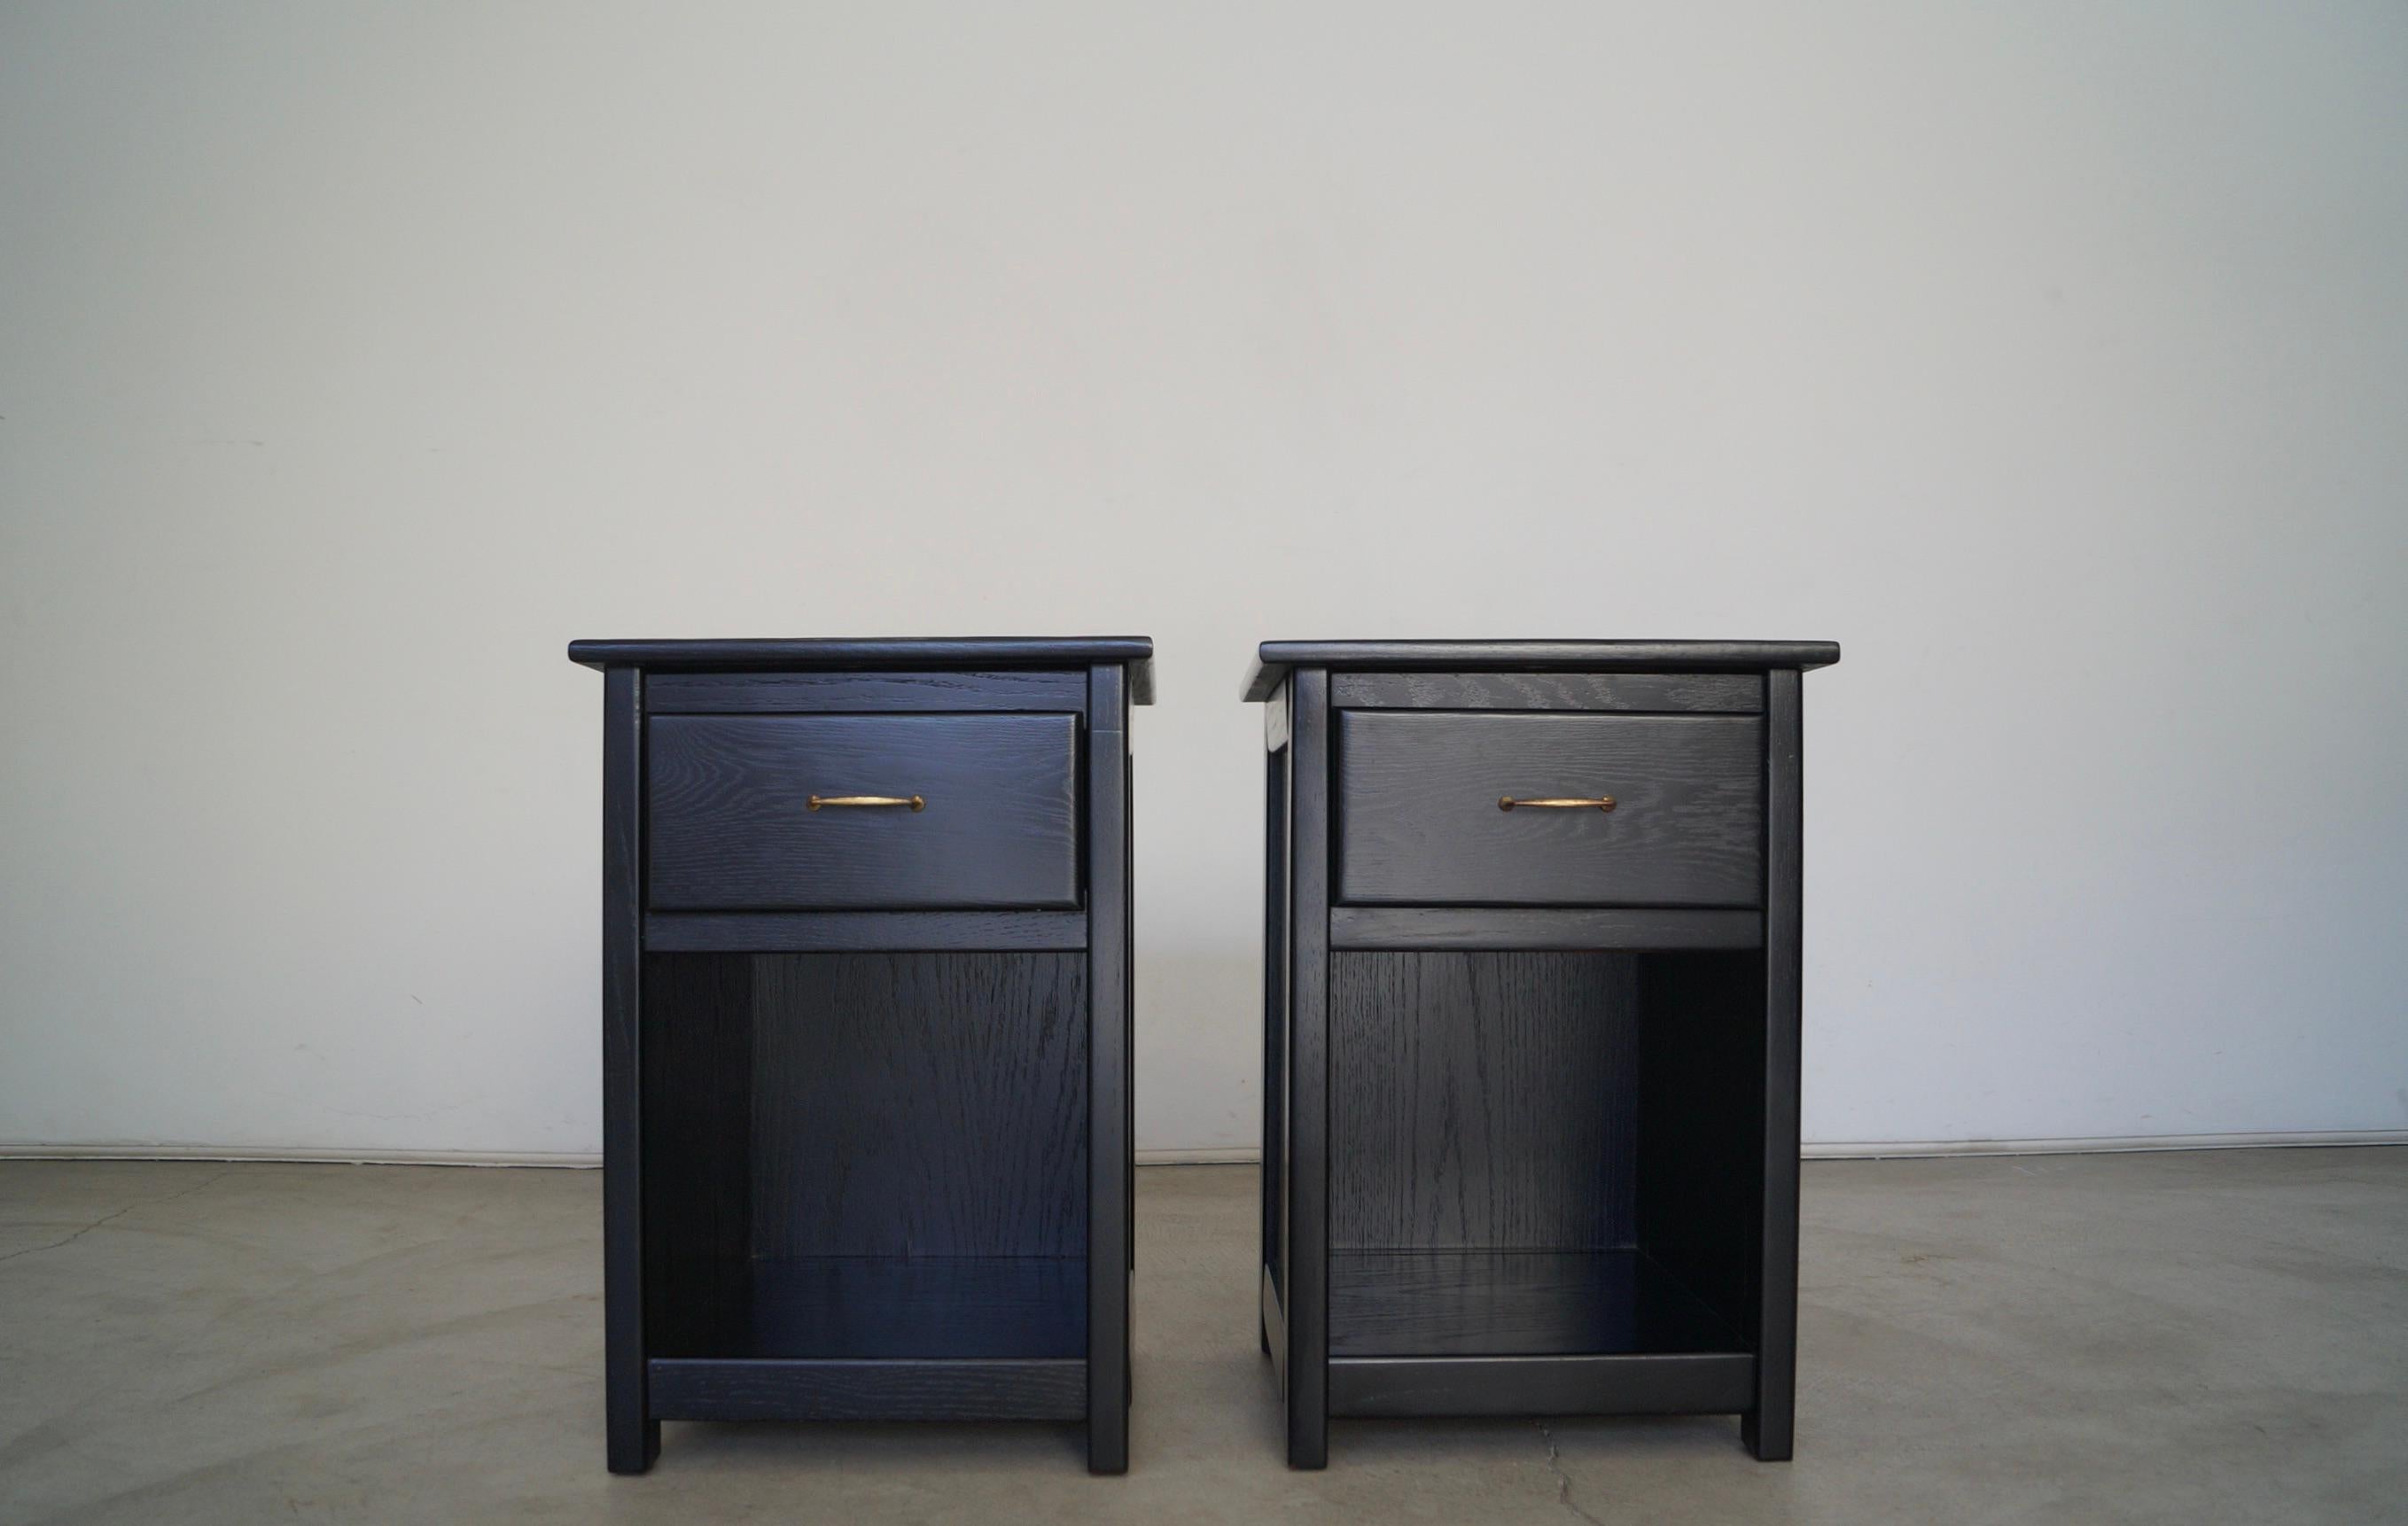 Vintage pair of Craftsman night stands for sale. Made of solid oak with a solid brass handle. They're really solid and well built, and are a great Size. They're from the 1970s, and have been professionally refinished. The oak has been ebonized with